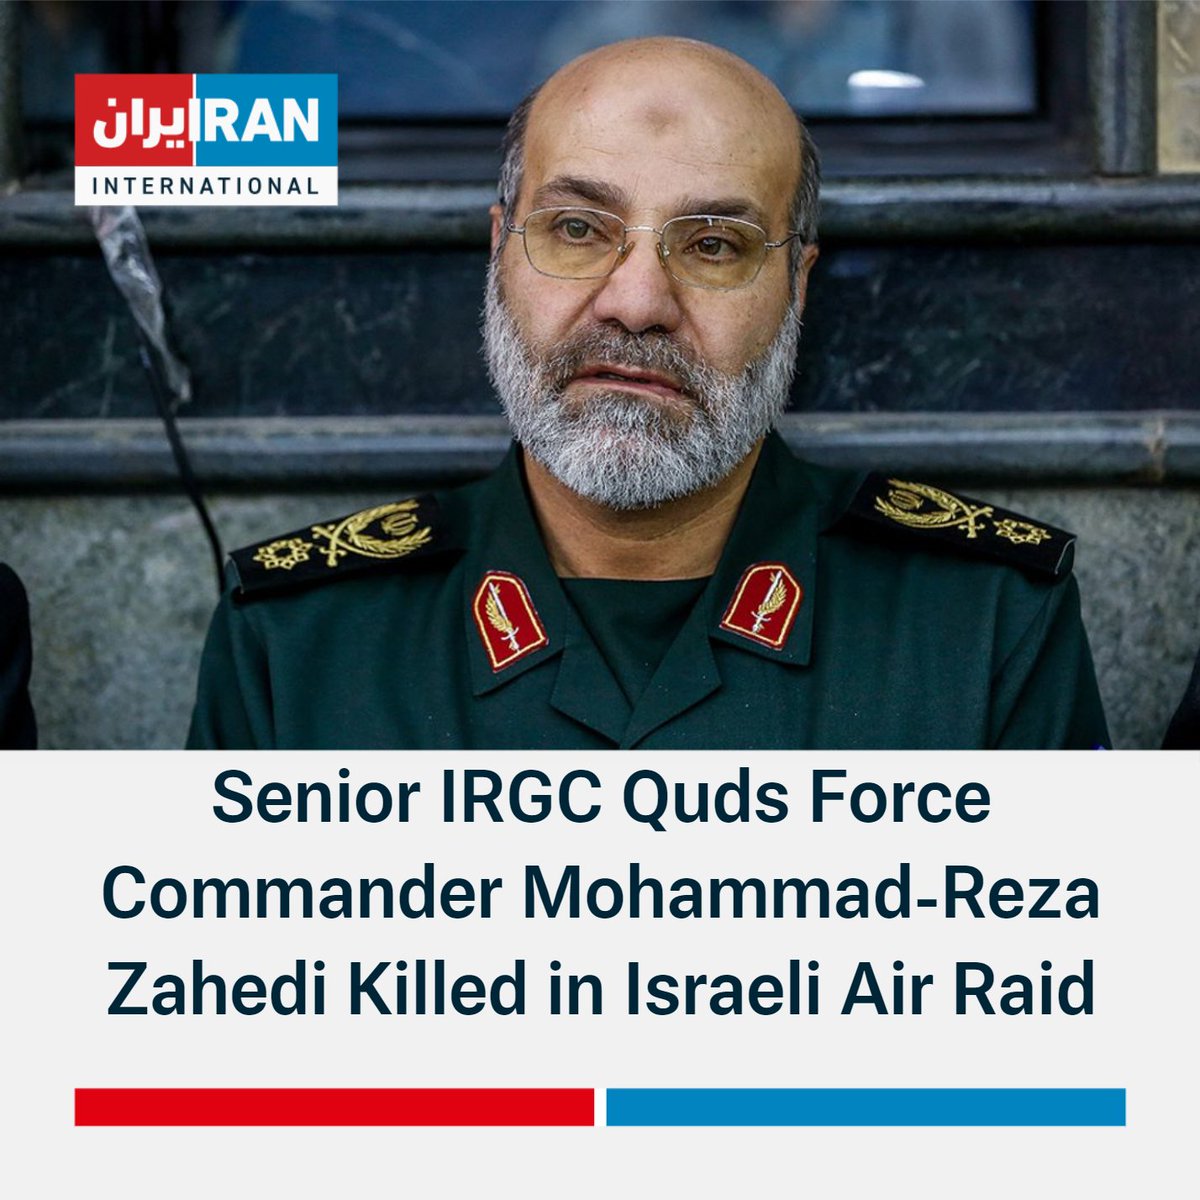 The Israeli airstrike against the consular wing of Iran's embassy in Damascus has killed senior IRGC Quds Force Commander Mohammad-Reza Zahedi, Iranian news outlets and pro-Hezbollah @AlMayadeenNews confirmed an earlier report by Reuters